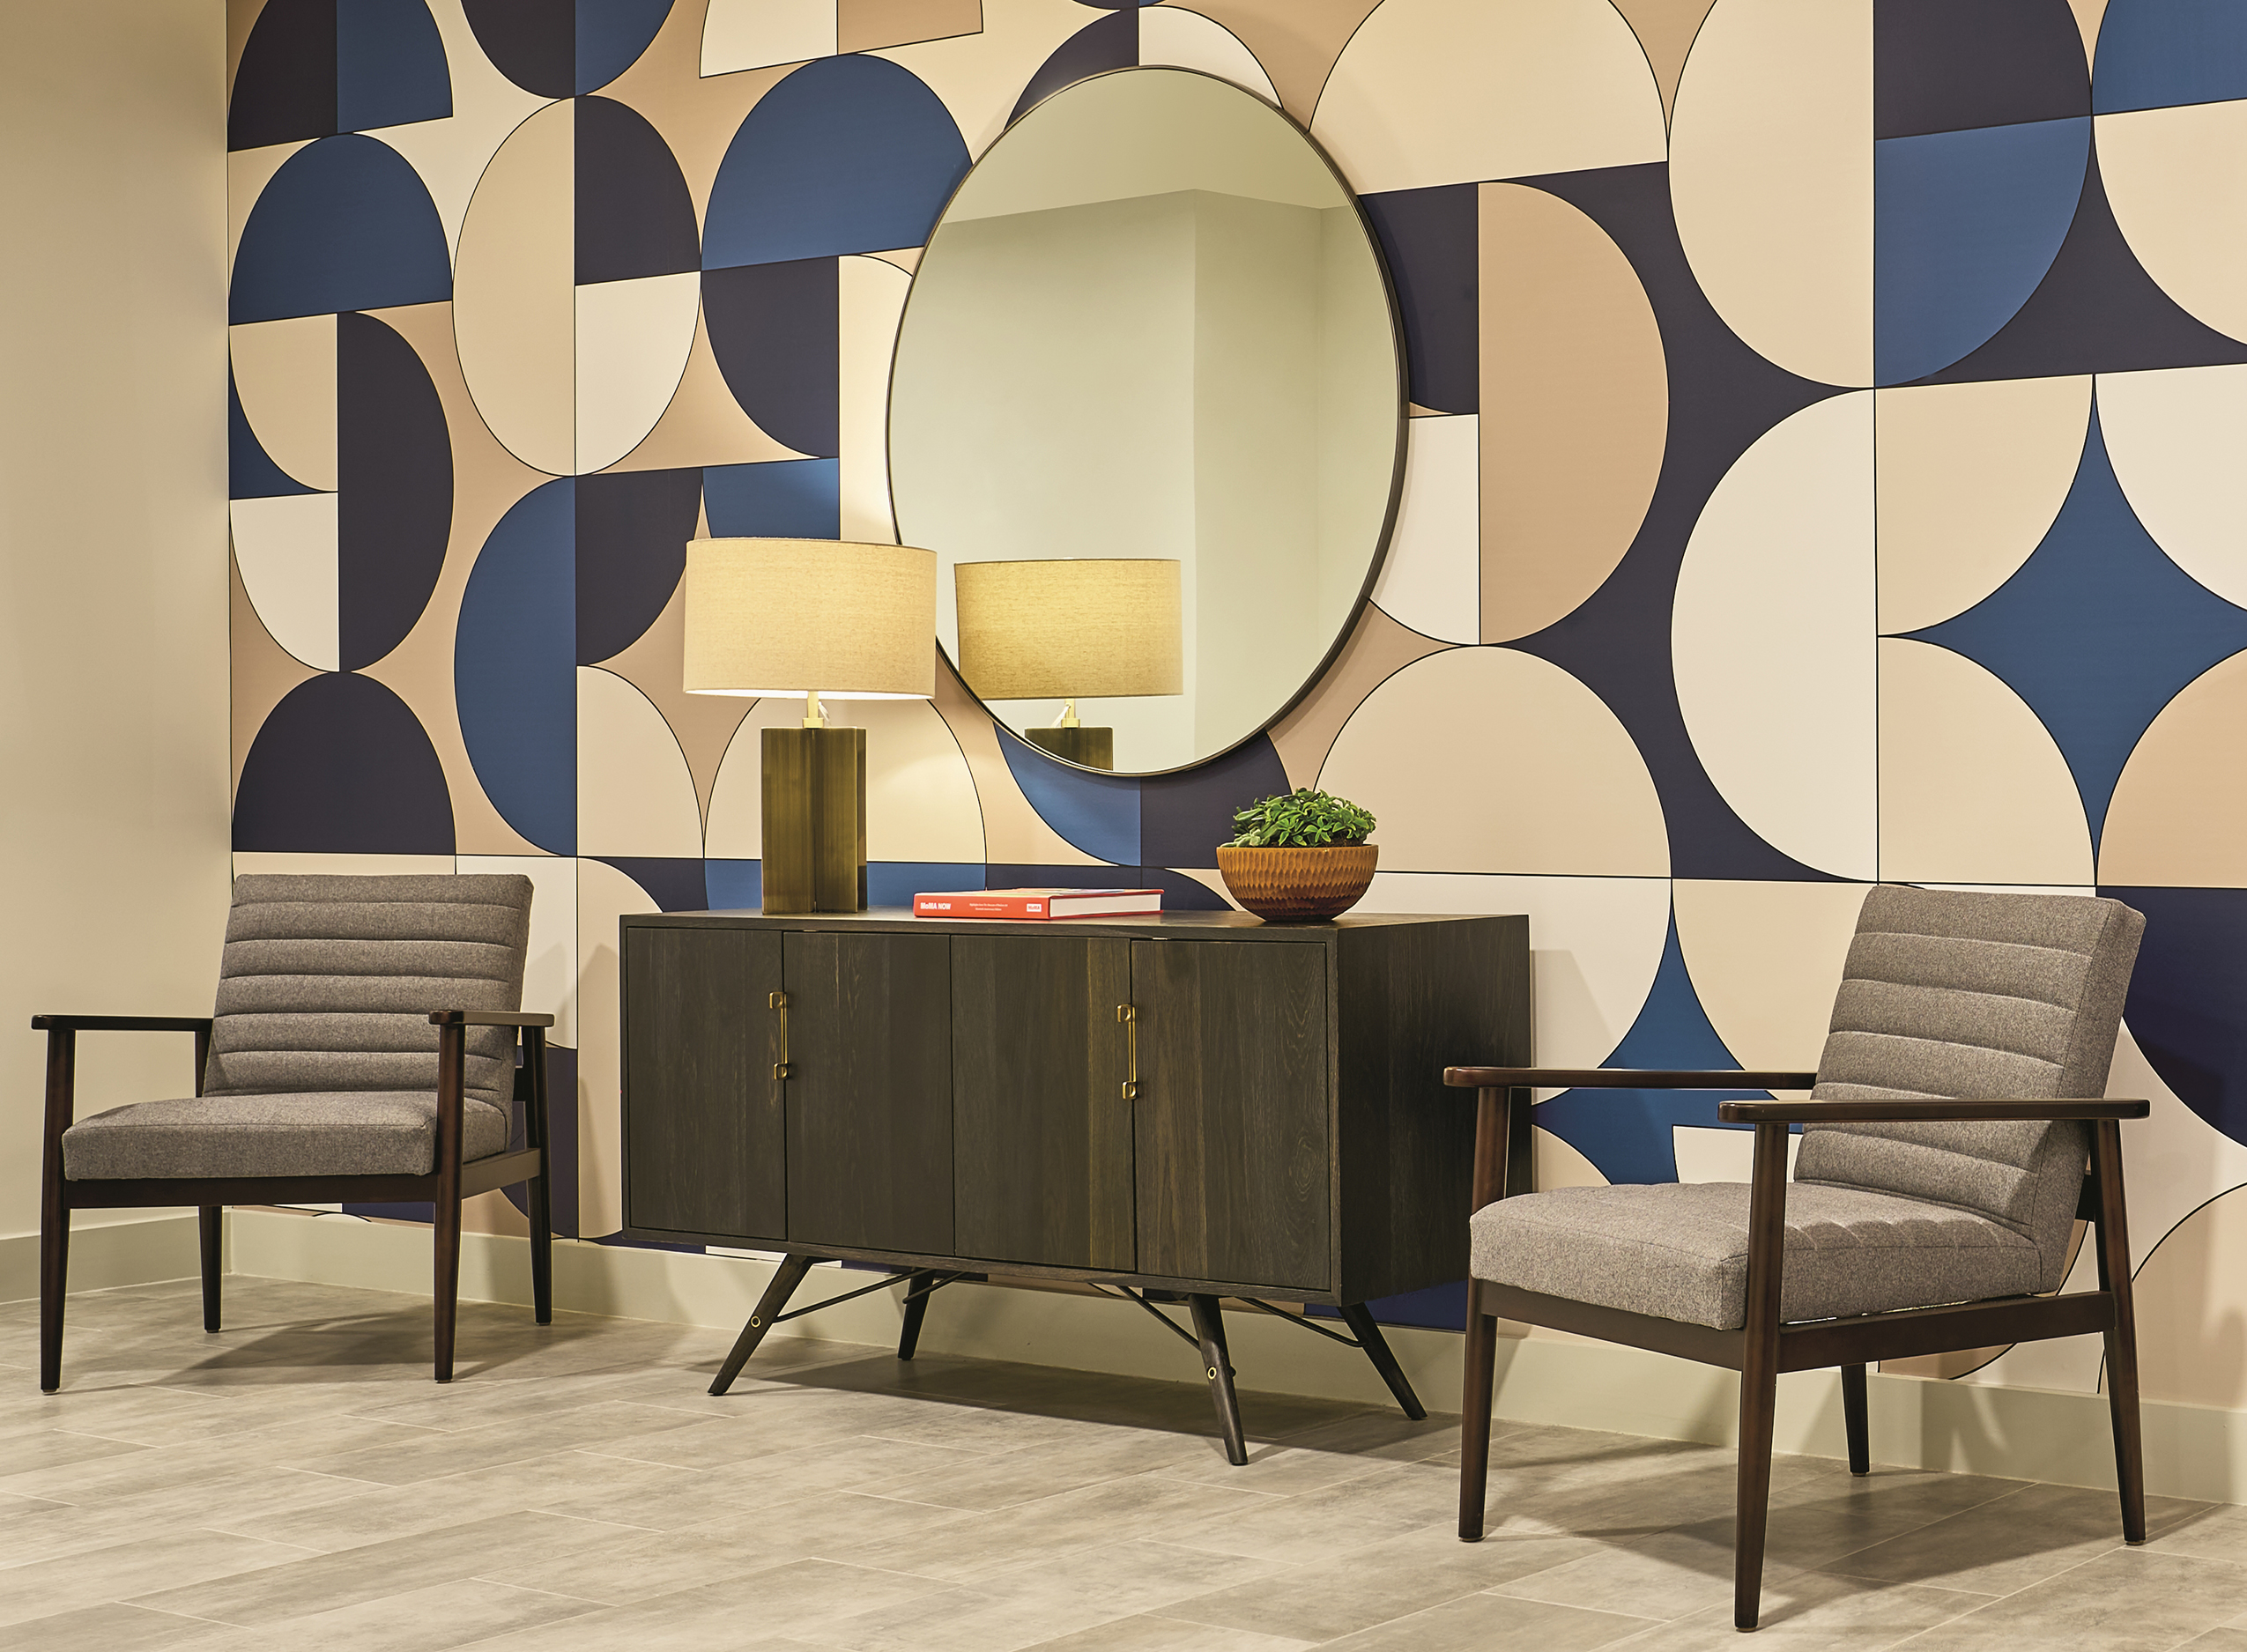 Lobby with patterned wall by Mary cook